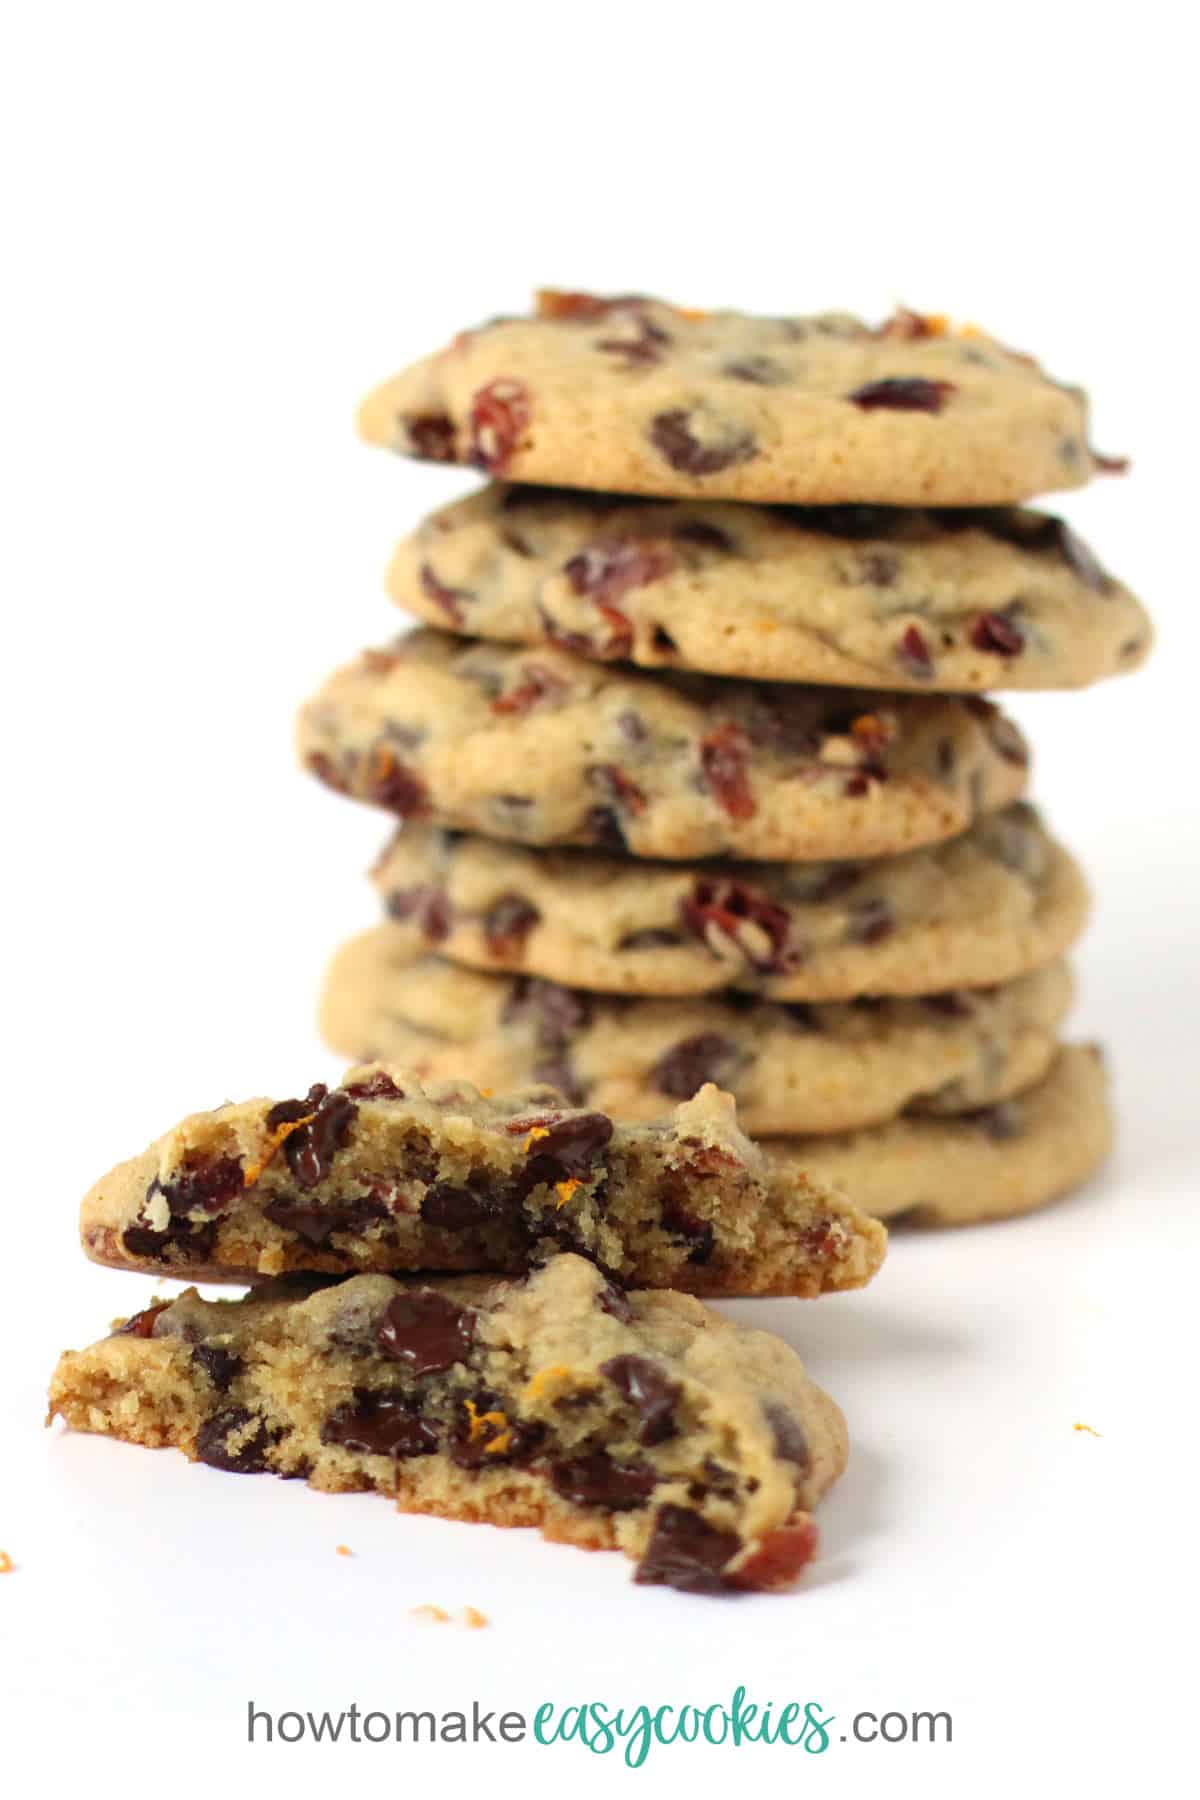 Chewy chocolate chip cranberry orange cookies made using corn syrup to keep them soft.